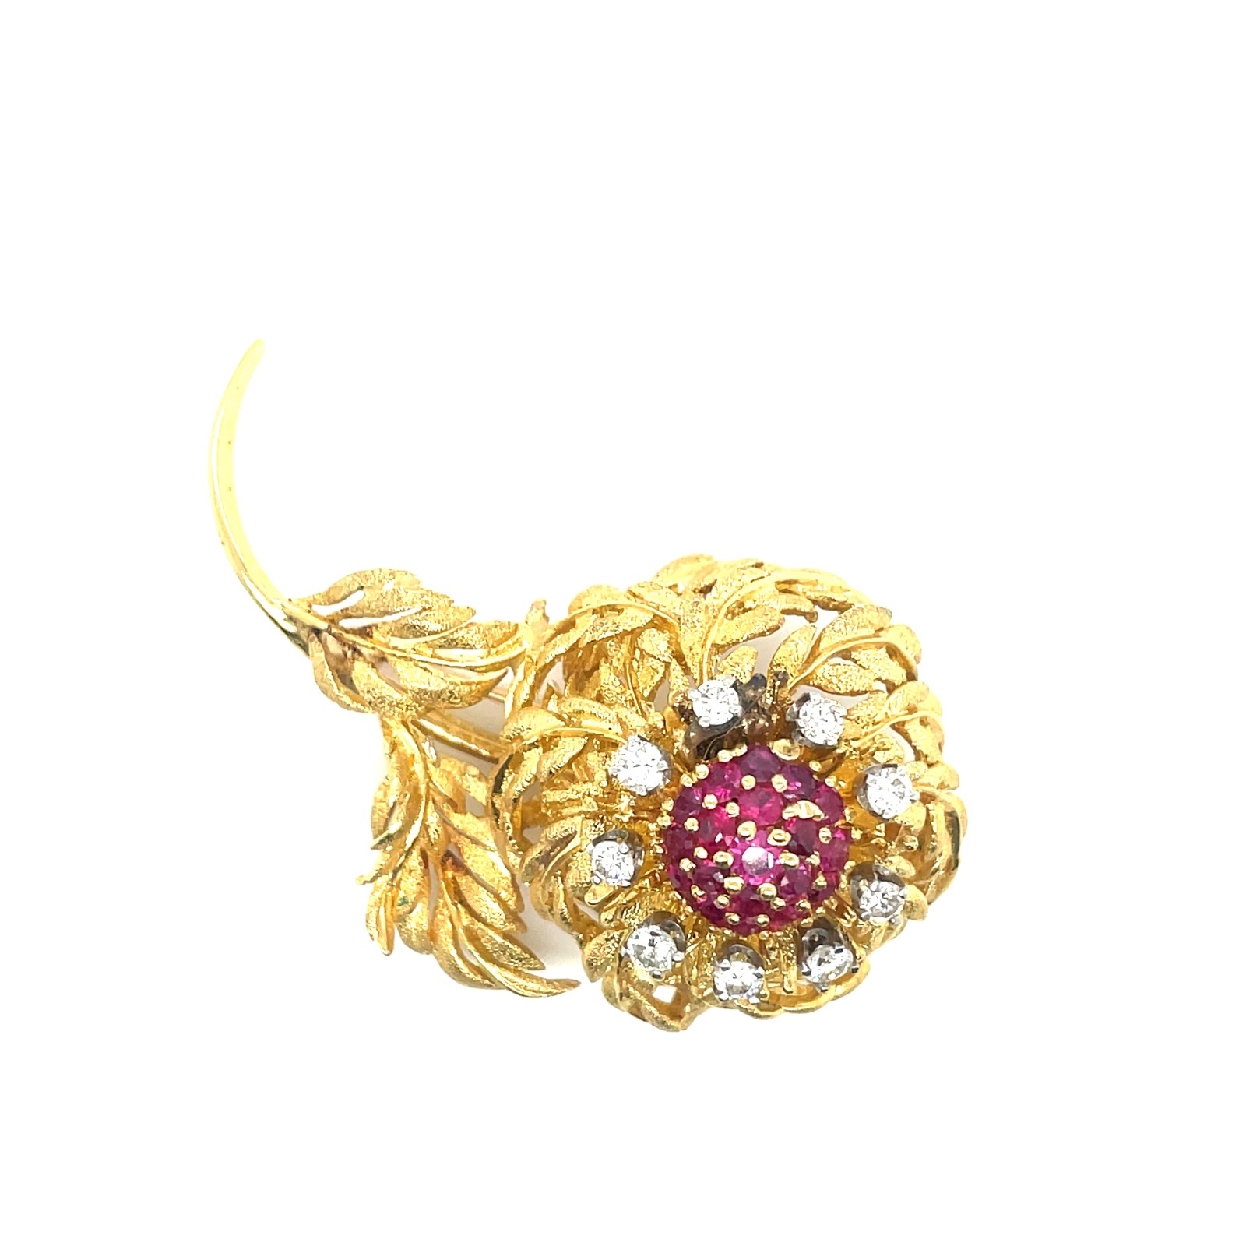 18K Yellow Gold Broach with Diamonds and Ruby Center